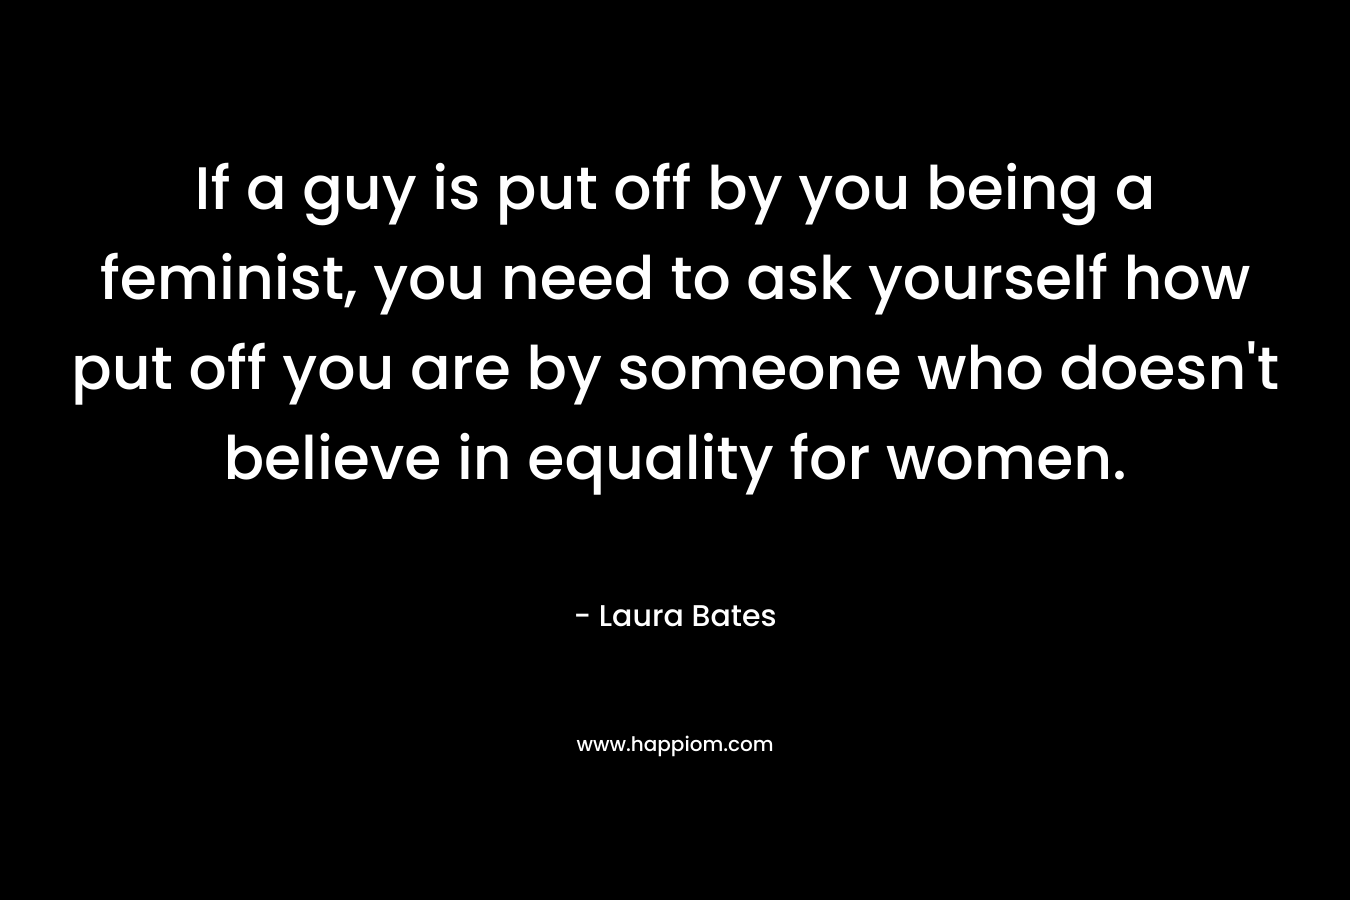 If a guy is put off by you being a feminist, you need to ask yourself how put off you are by someone who doesn’t believe in equality for women. – Laura Bates